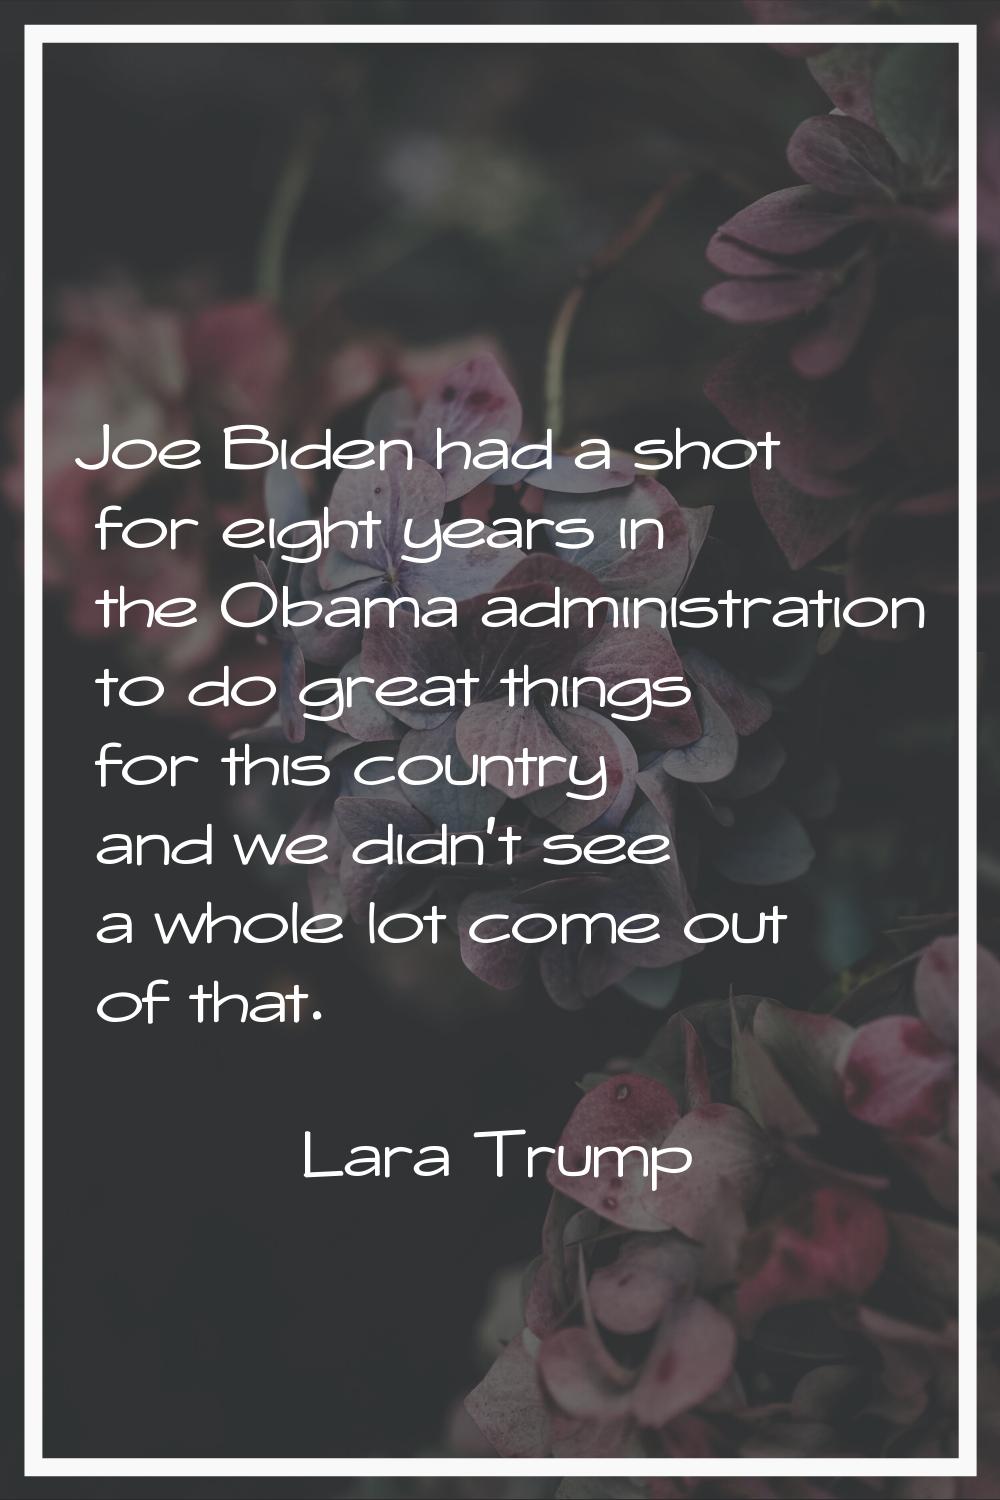 Joe Biden had a shot for eight years in the Obama administration to do great things for this countr